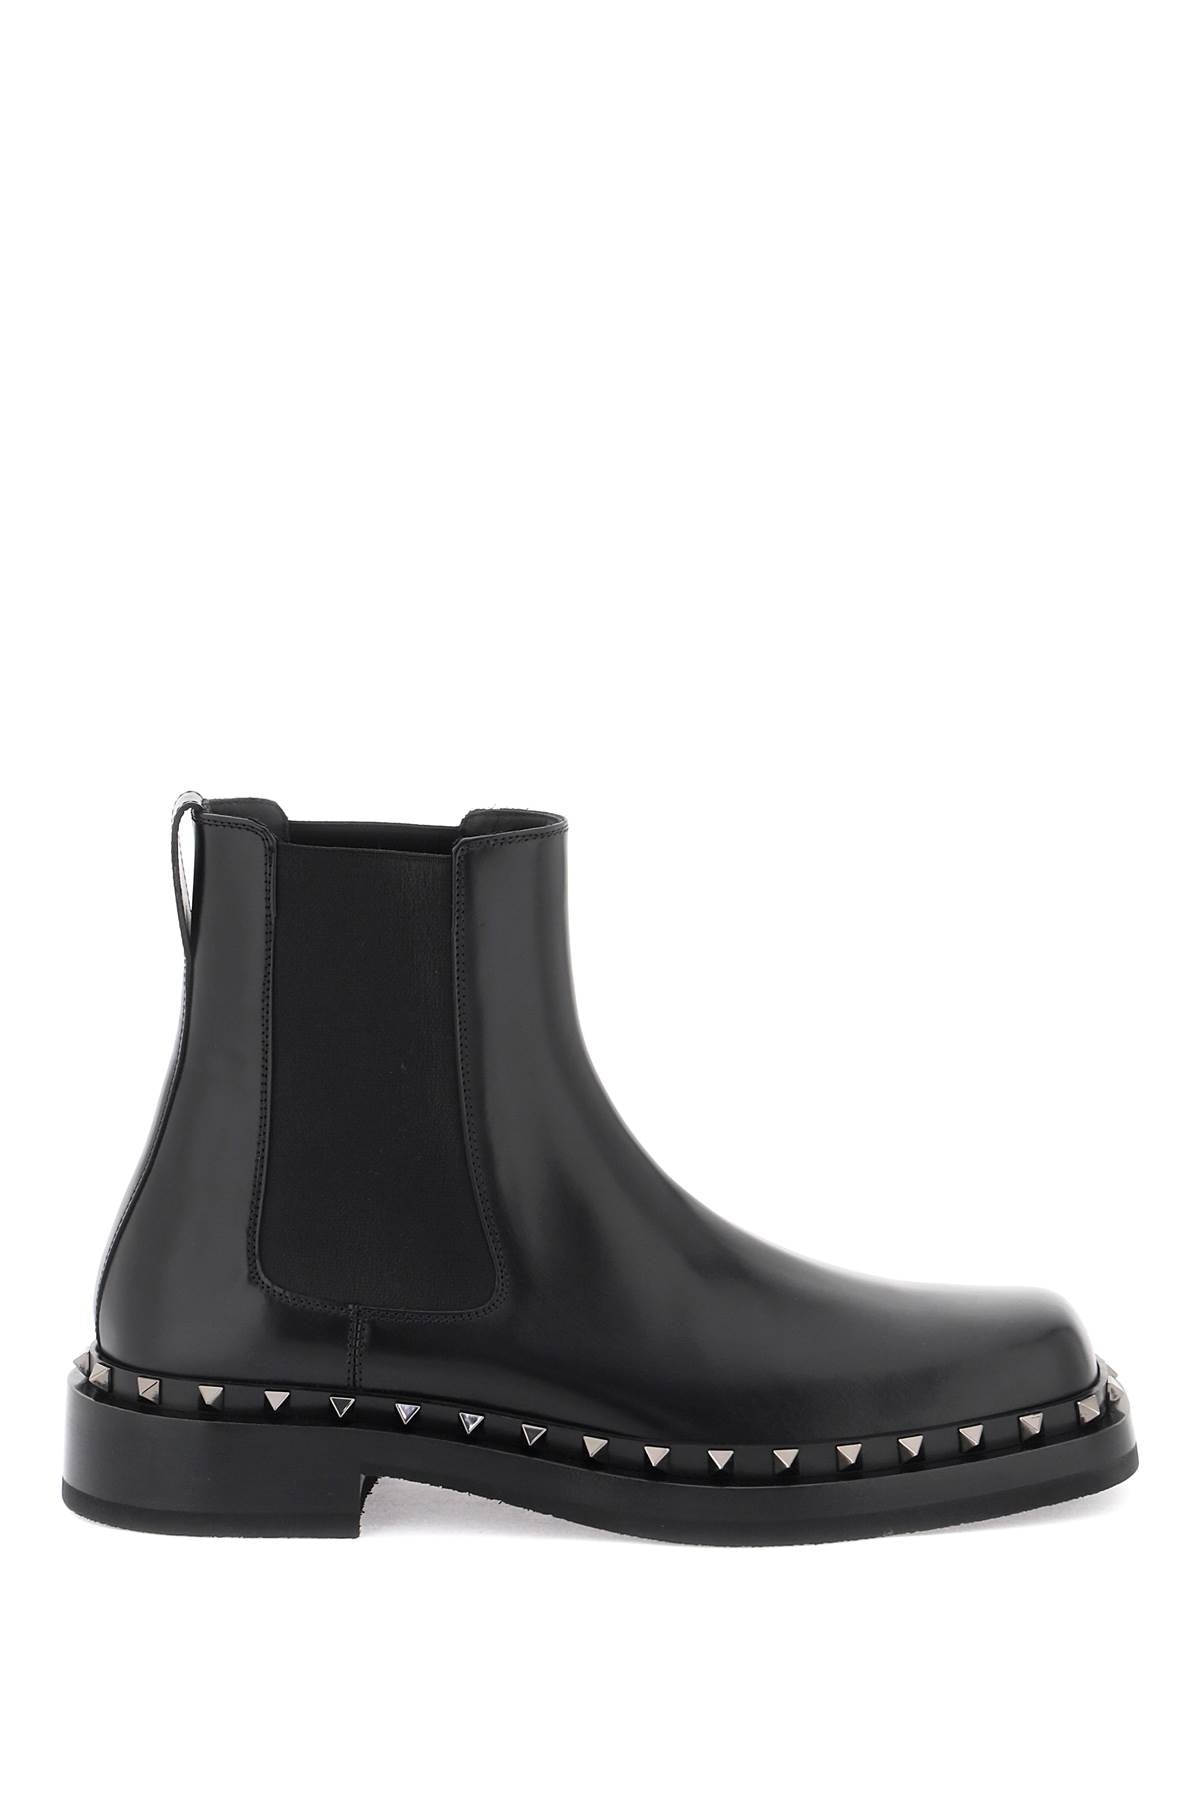 VALENTINO GARAVANI Men's Black Leather Ankle Boots with Platinum Studs - FW23 Collection